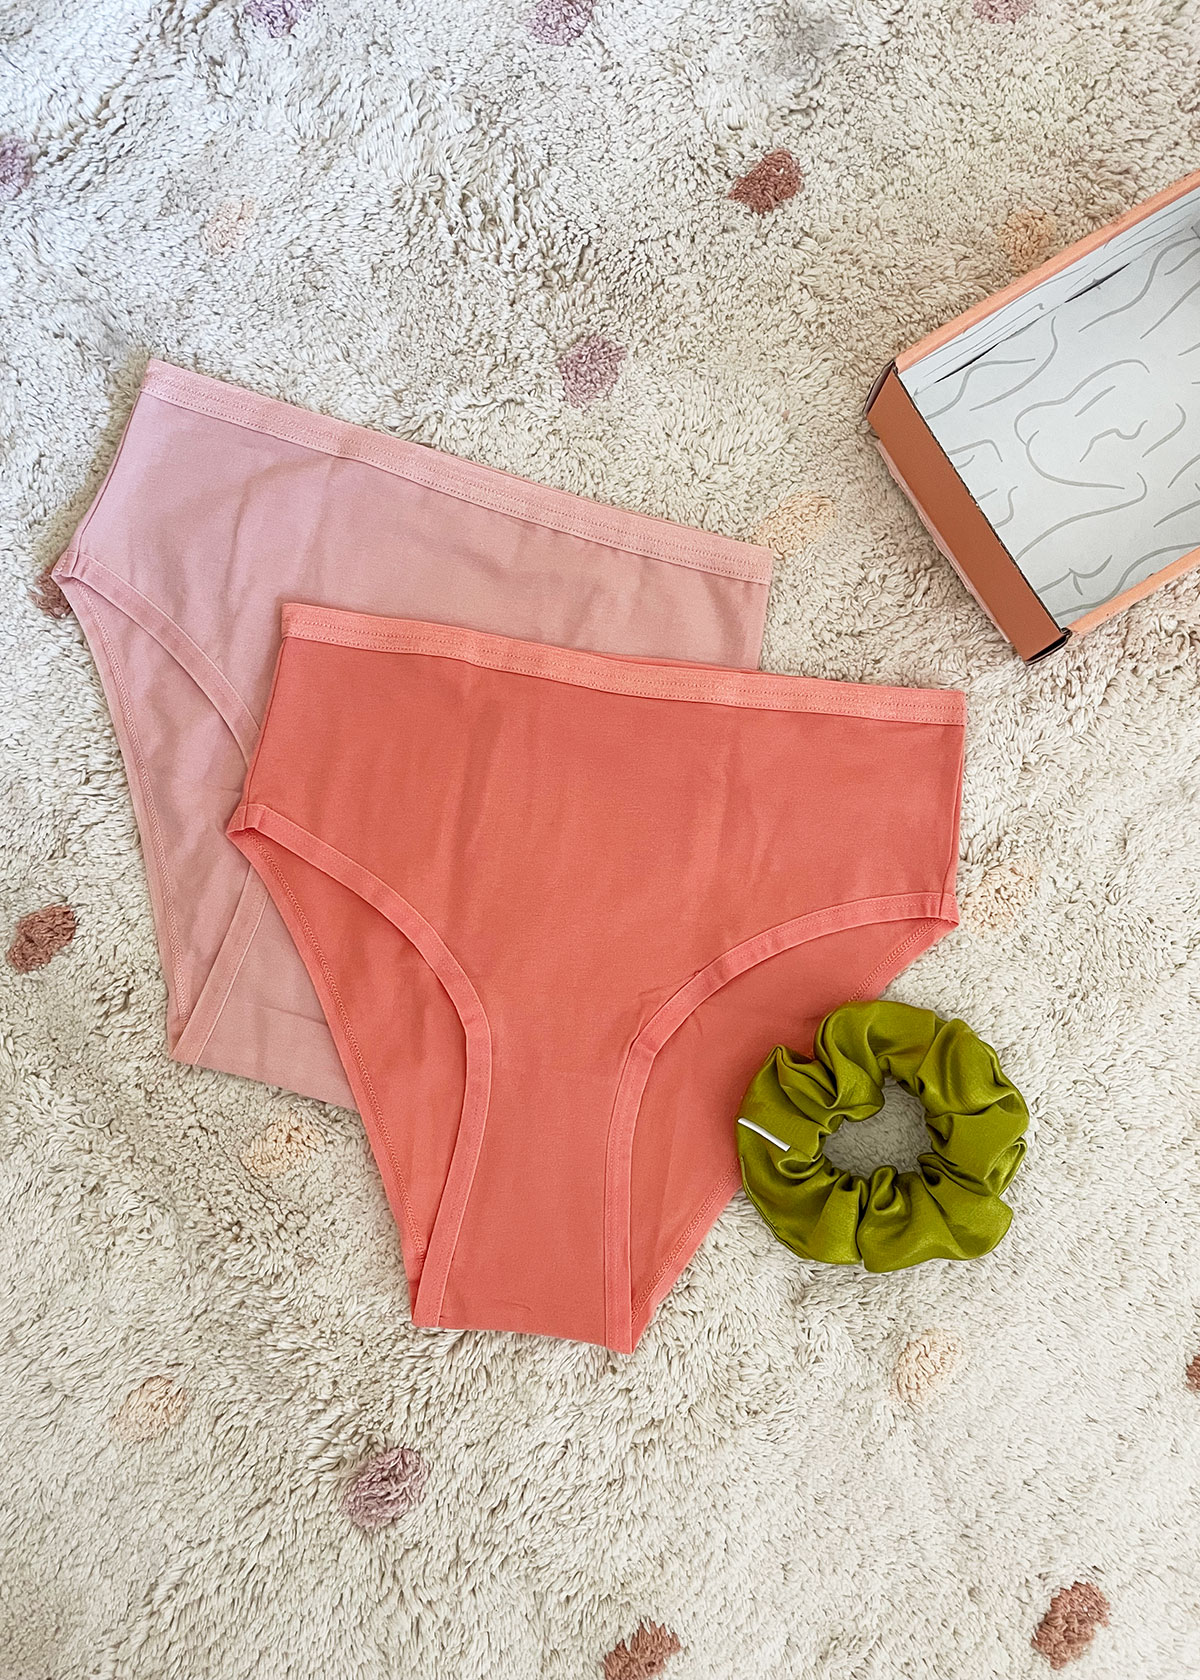 Knickey (Subset): Undies & Recycling Review